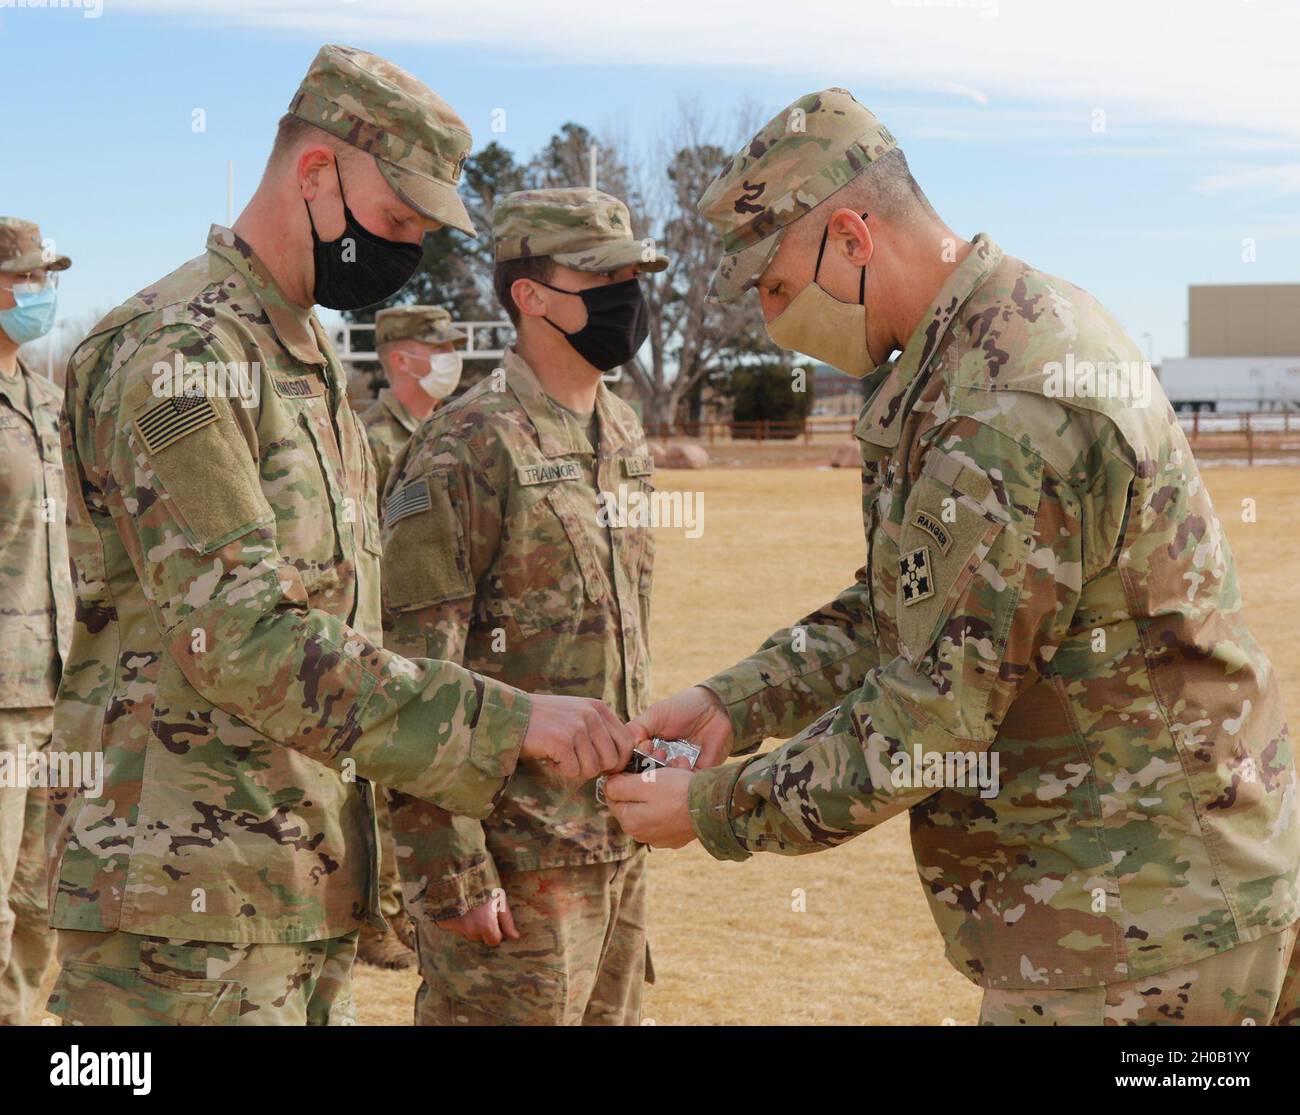 Command Sgt. Maj. Adam Nash (Right), Command Sgt. Maj. of the 4th Infantry Division, hands the winners of the Ivy Best Medic competition, Spc. Anchor Jennison (Left) with the 3-61 Cavalry Regiment, 2nd Stryker Brigade Combat Team, 4th Inf. Div. and Sgt. Tyrel Trainor (Center) with the 52nd Brigade Engineer Battalion, 2SBCT, 4th Inf. Div., the first place medal for the Ivy Best Medic competition Jan. 14, 2021 Fort Carson, Colorado. Ivy shaped medals were given to both winners of the Ivy Best Medic Competition. Stock Photo